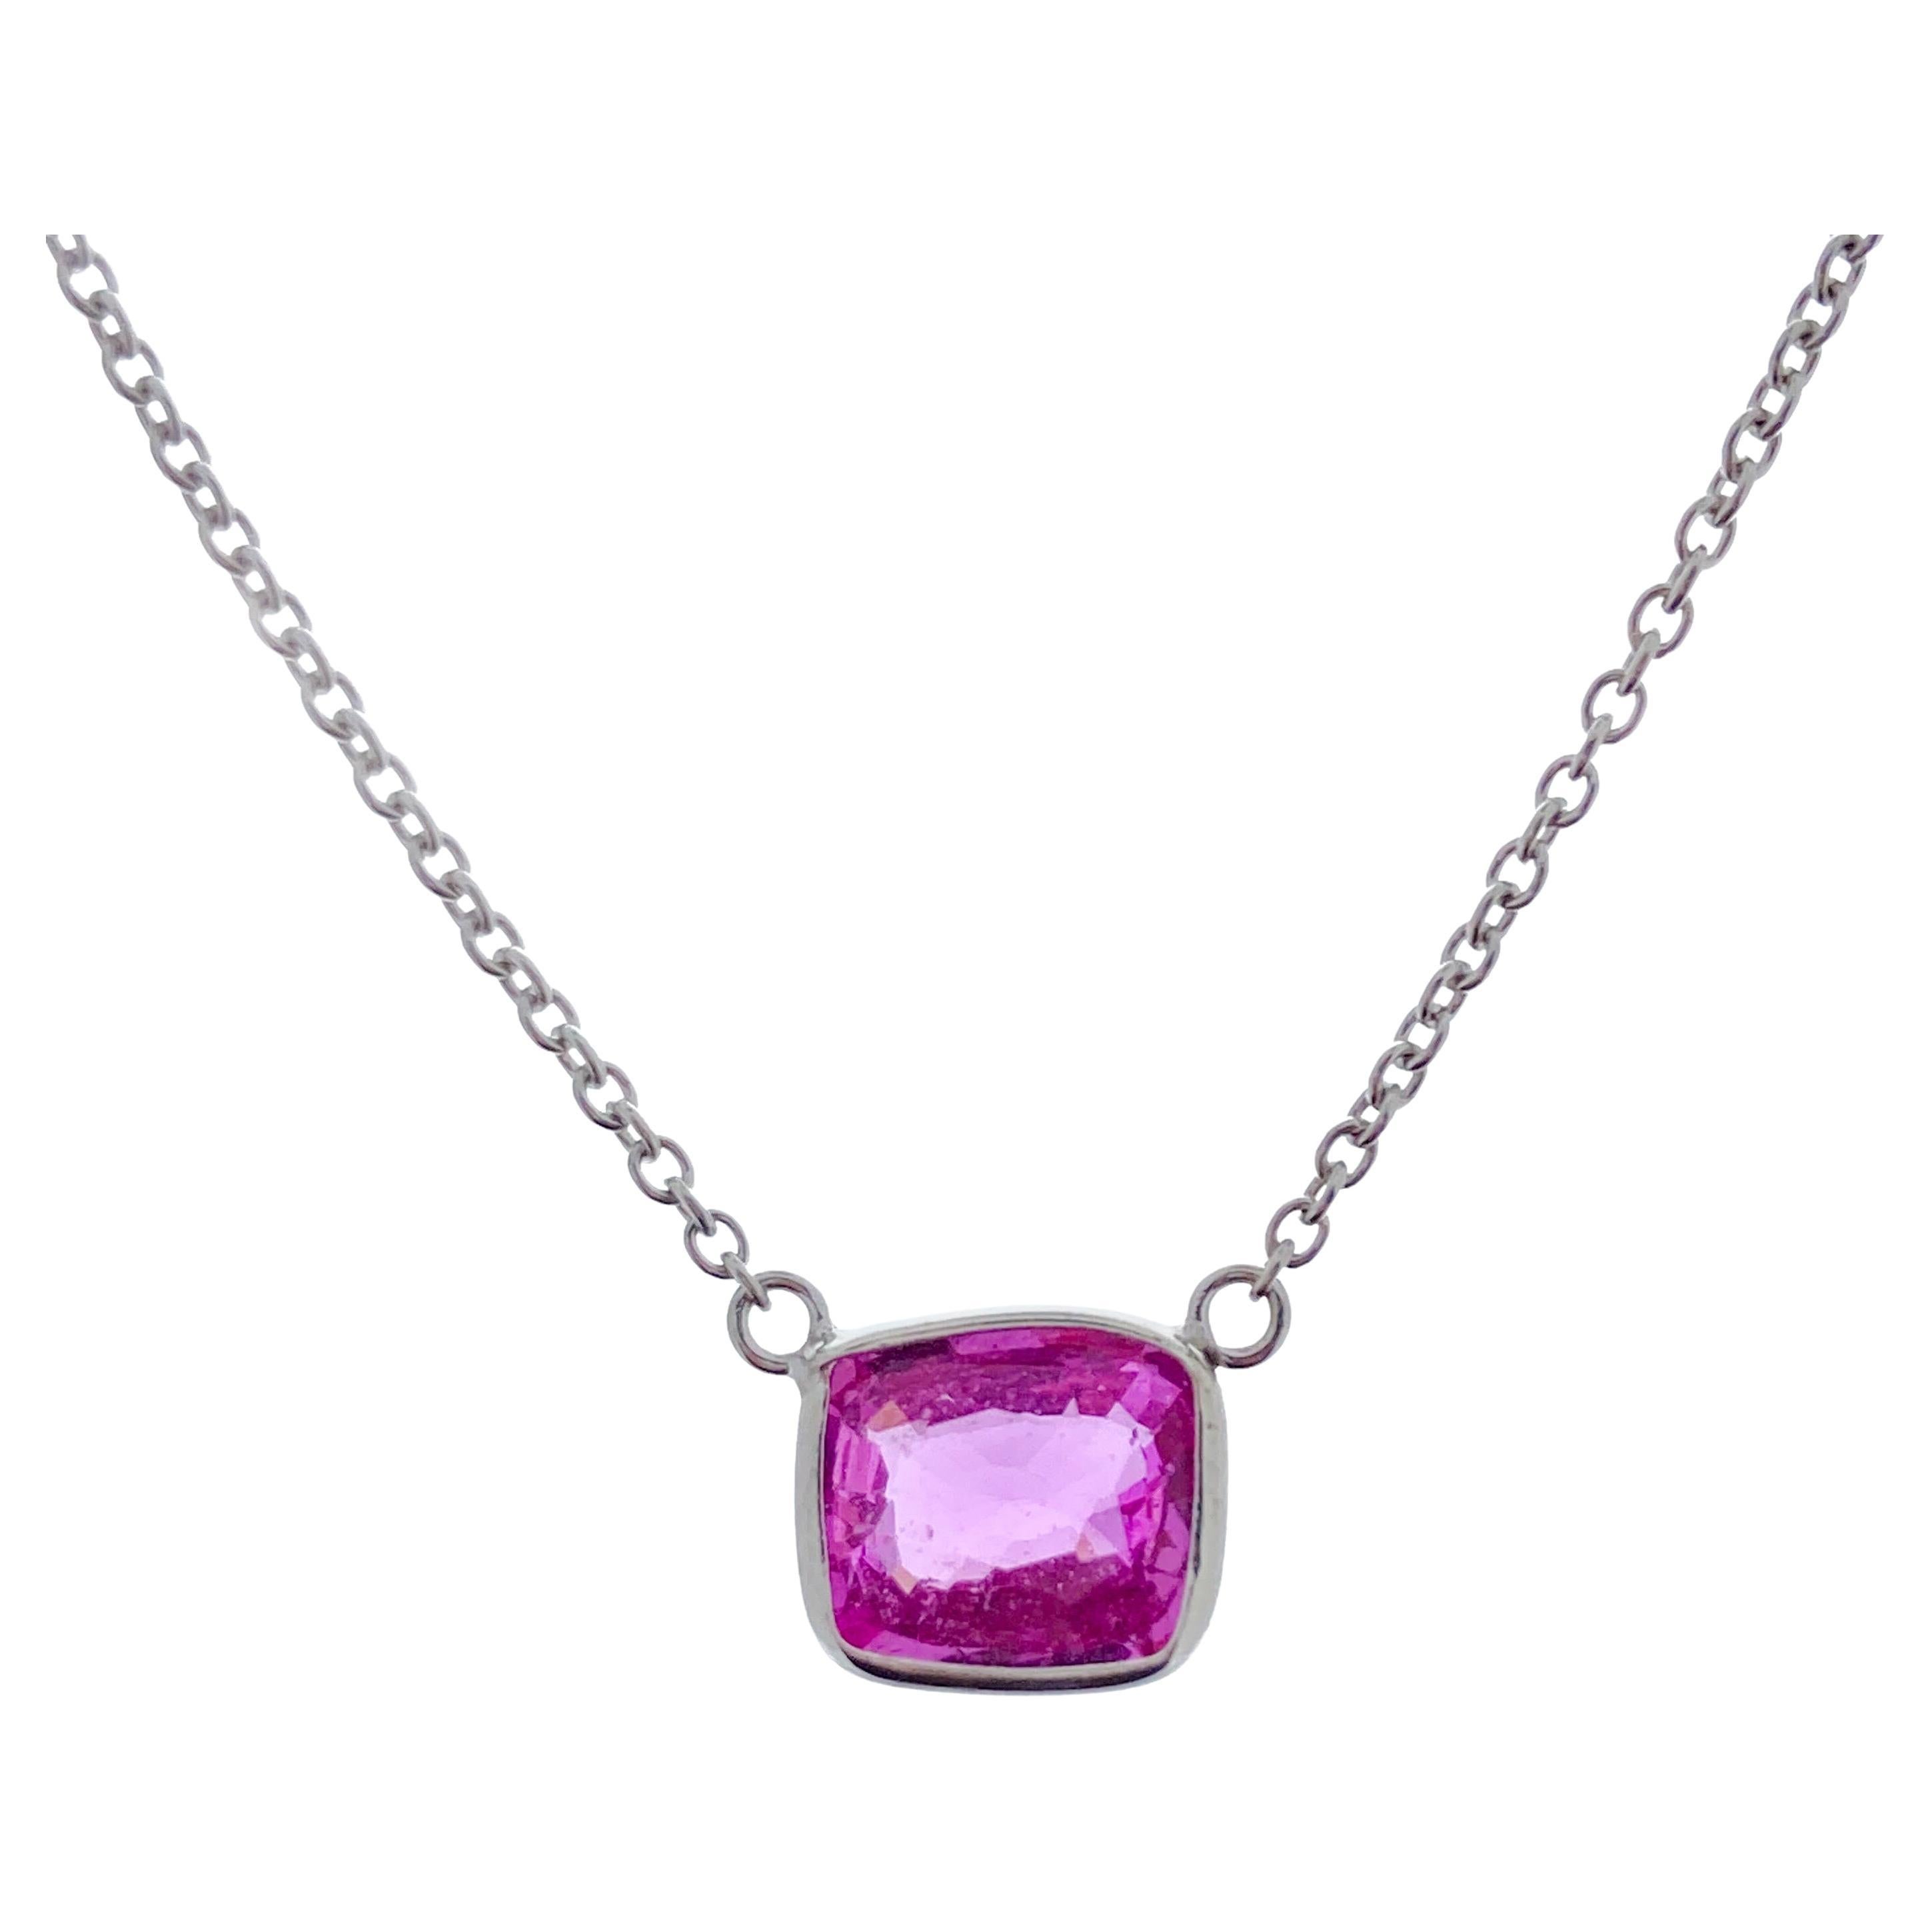 1.60 Carat Cushion Pink Sapphire Fashion Necklaces In 14K White Gold 